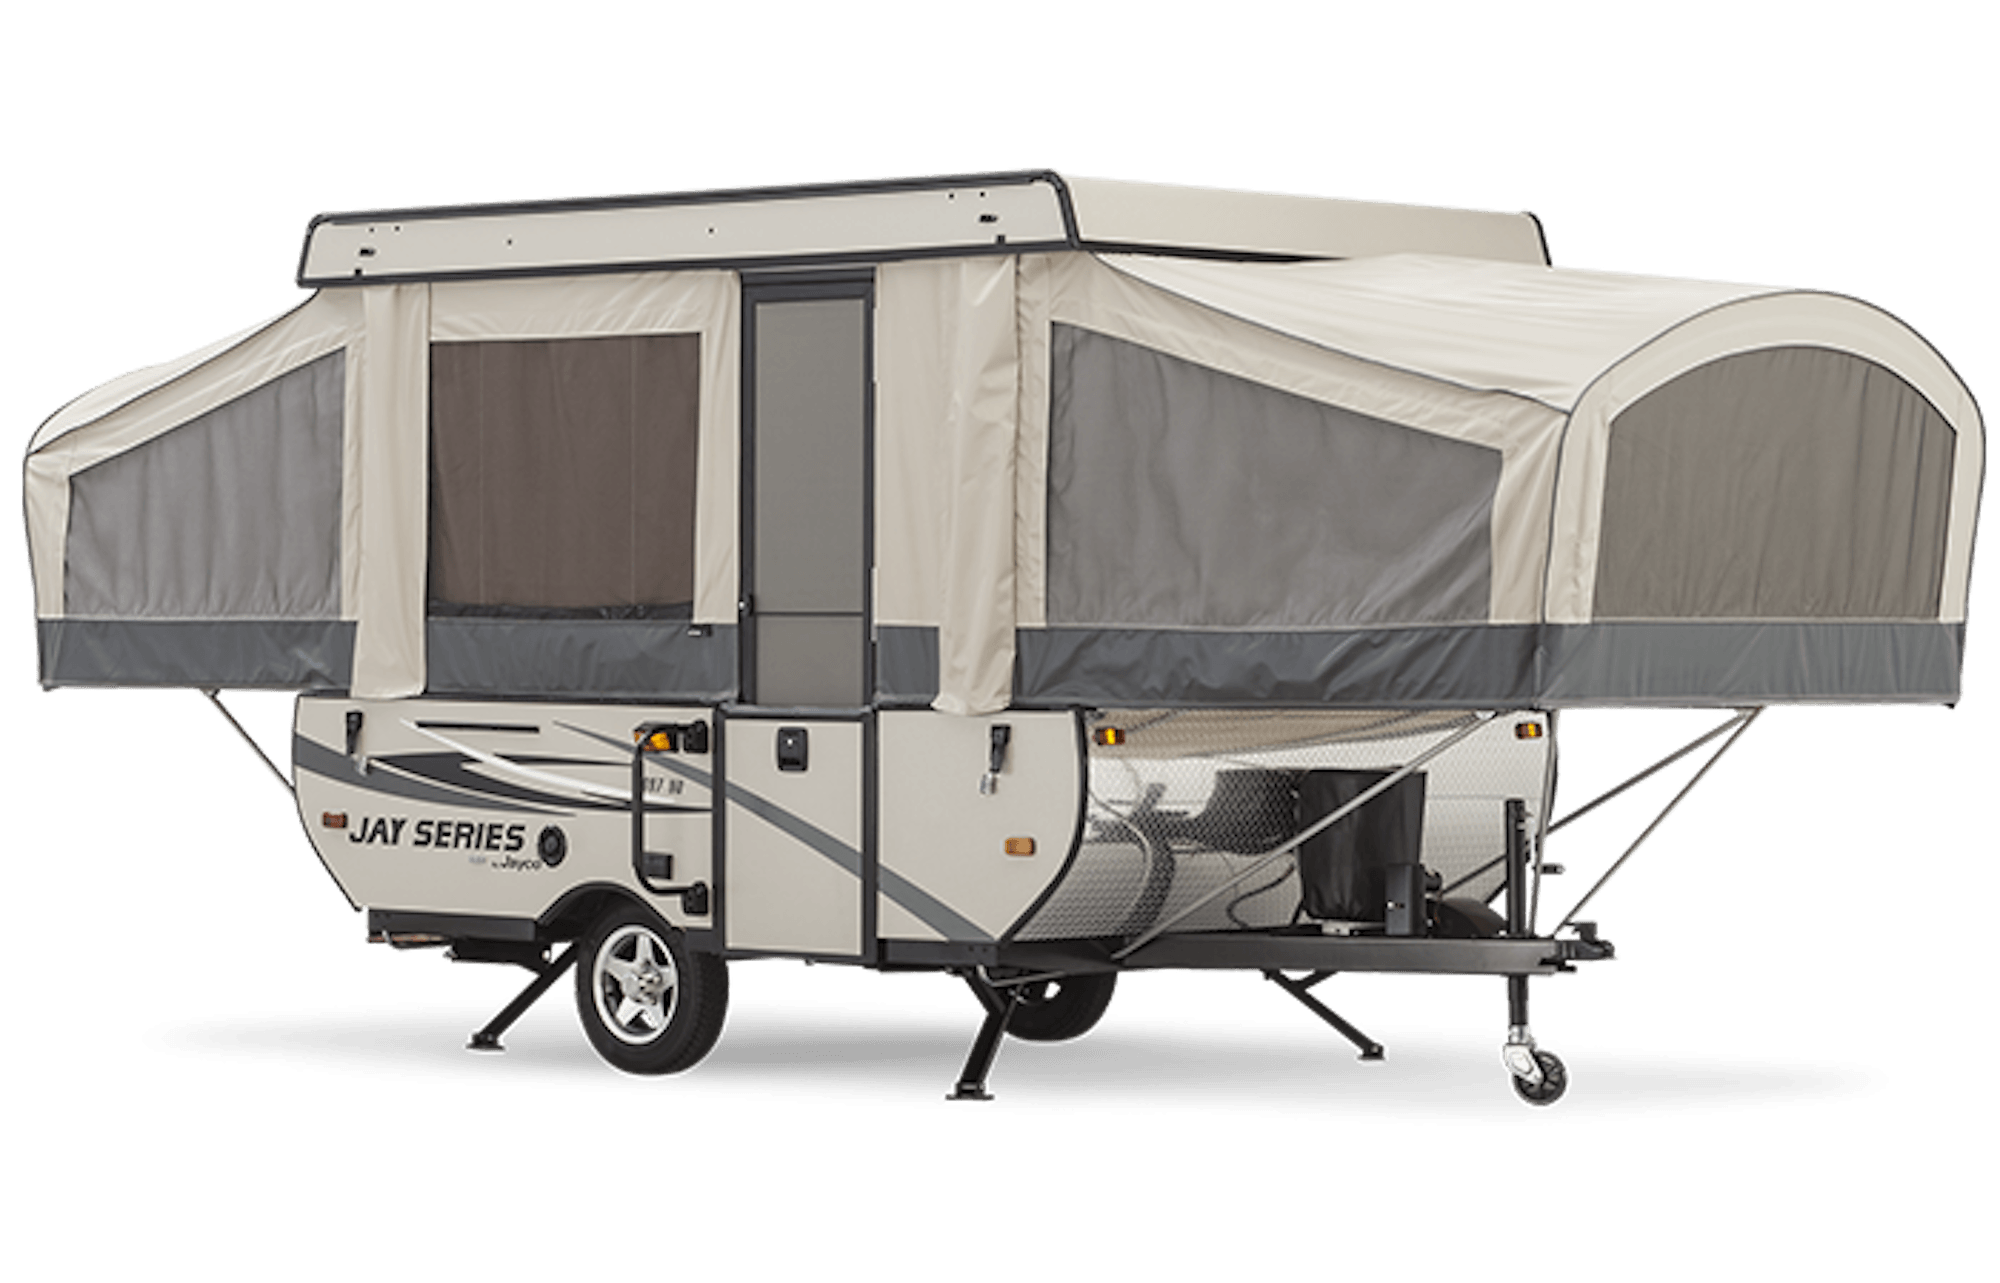 Find your best Jayco finance rate with Driva